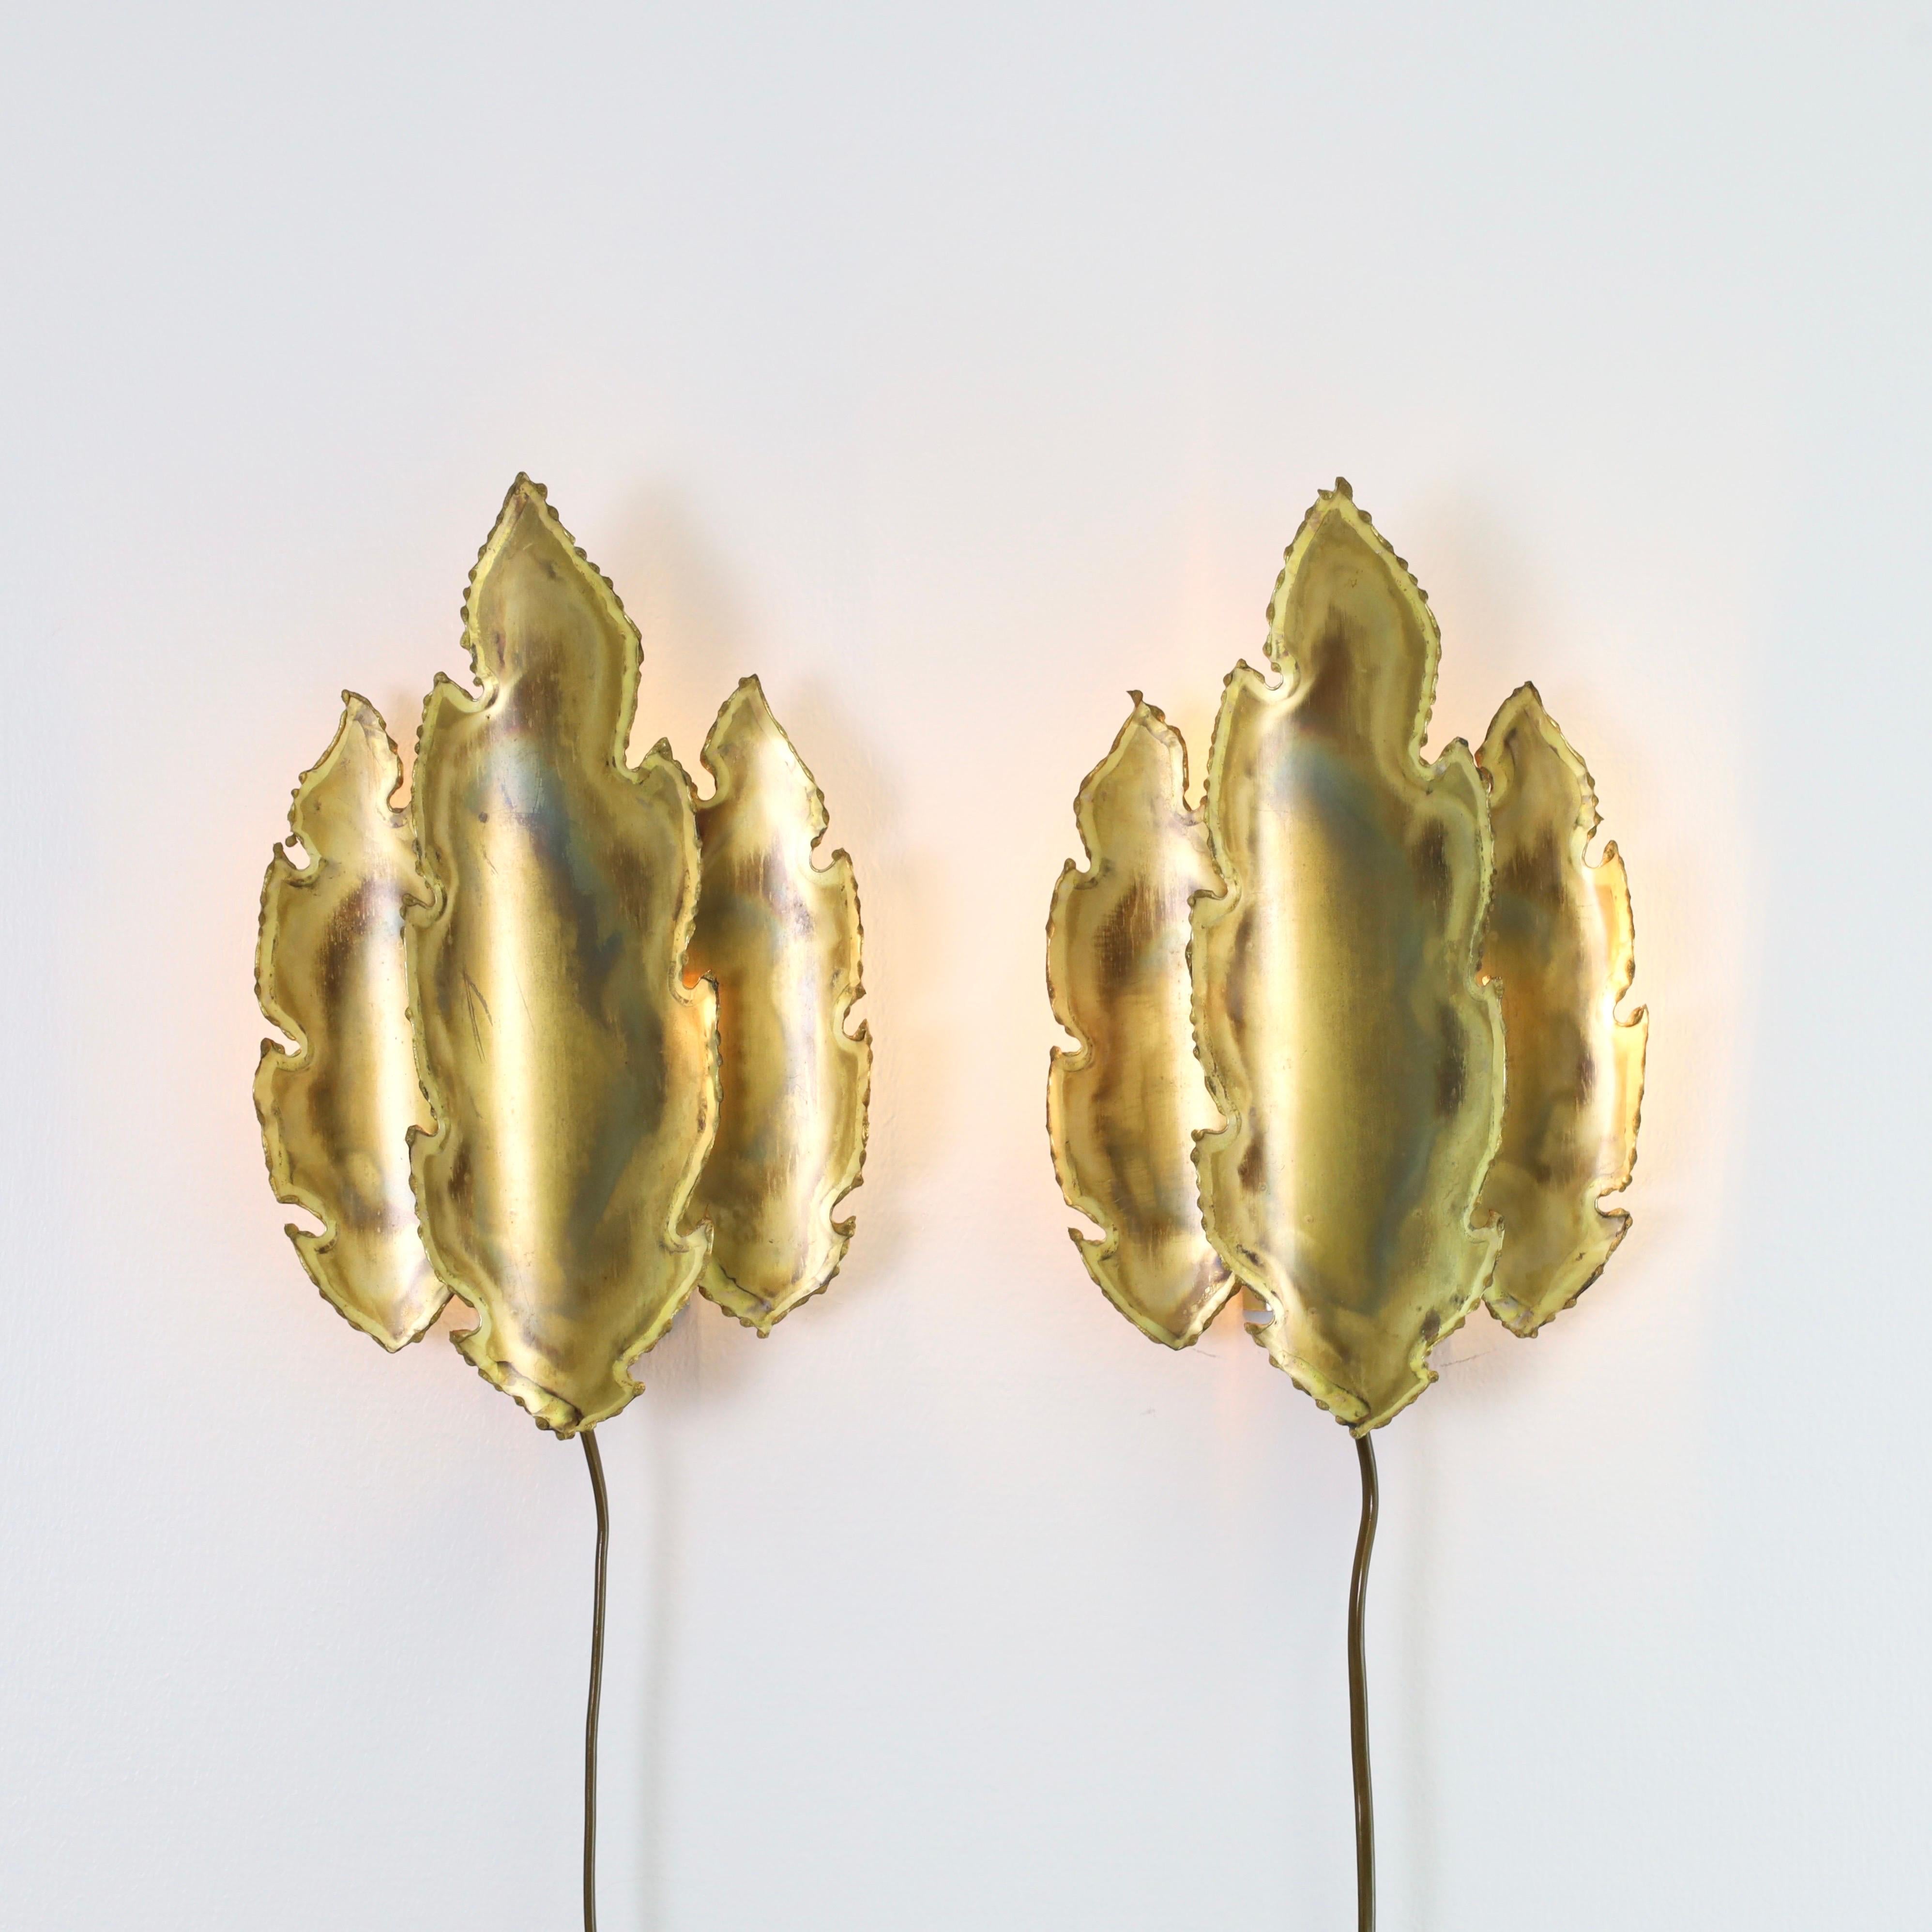 Pair of Leaf-Shaped Brass Wall Lamps by Svend Aage Holm Sorensen, 1960s, Denmark For Sale 2